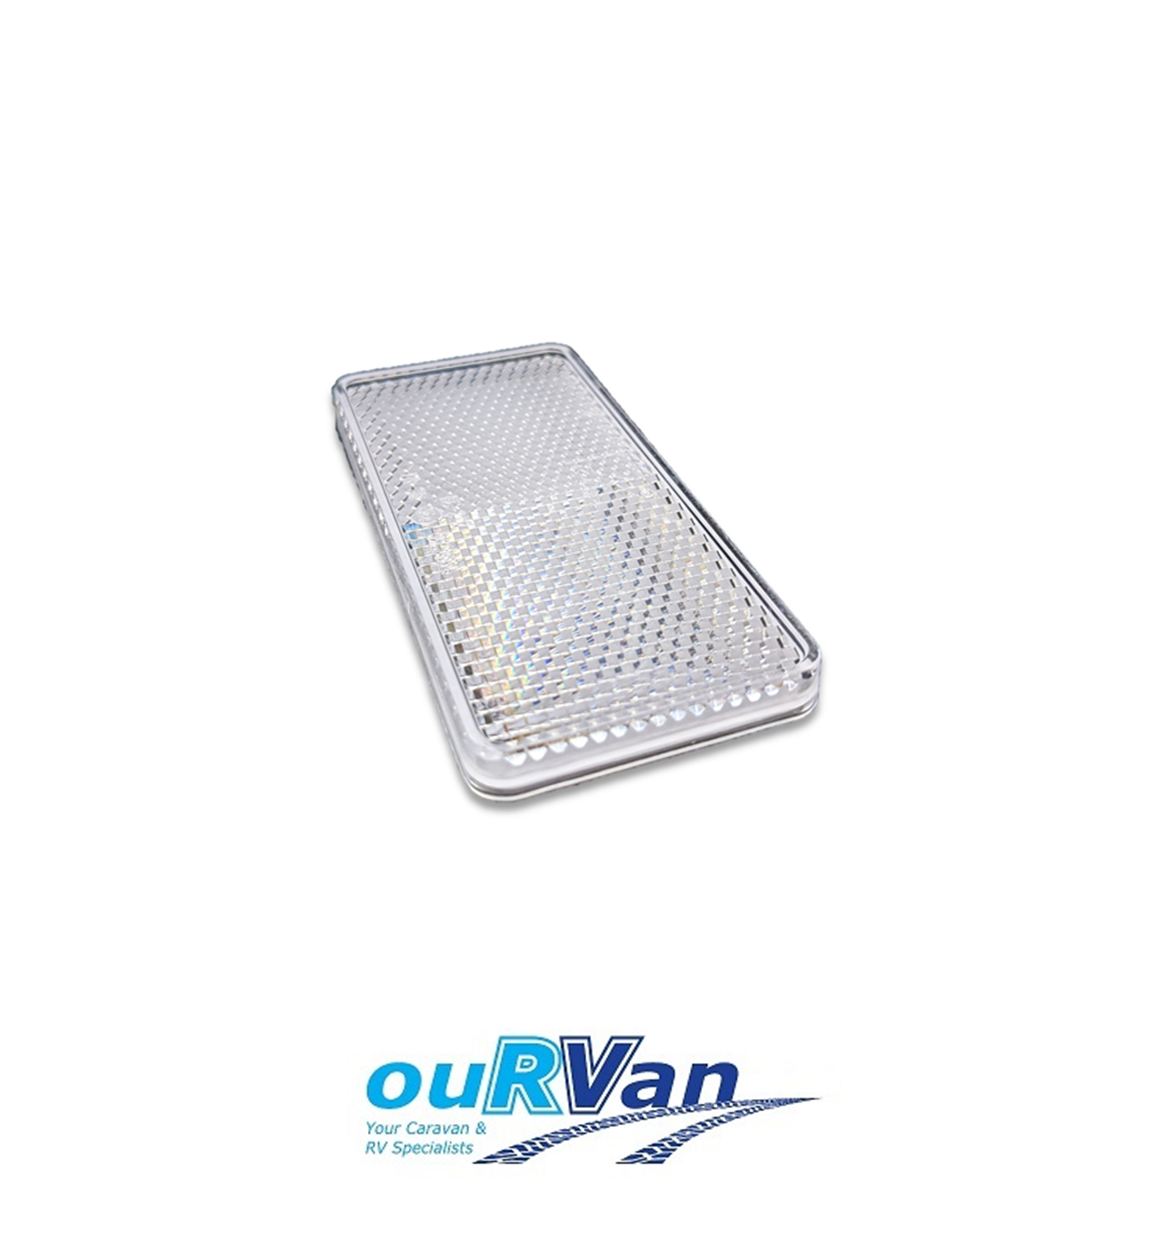 1 x 84050 EQUIVALENT 94mm x 44mm CLEAR SELF ADHESIVE REFLECTOR